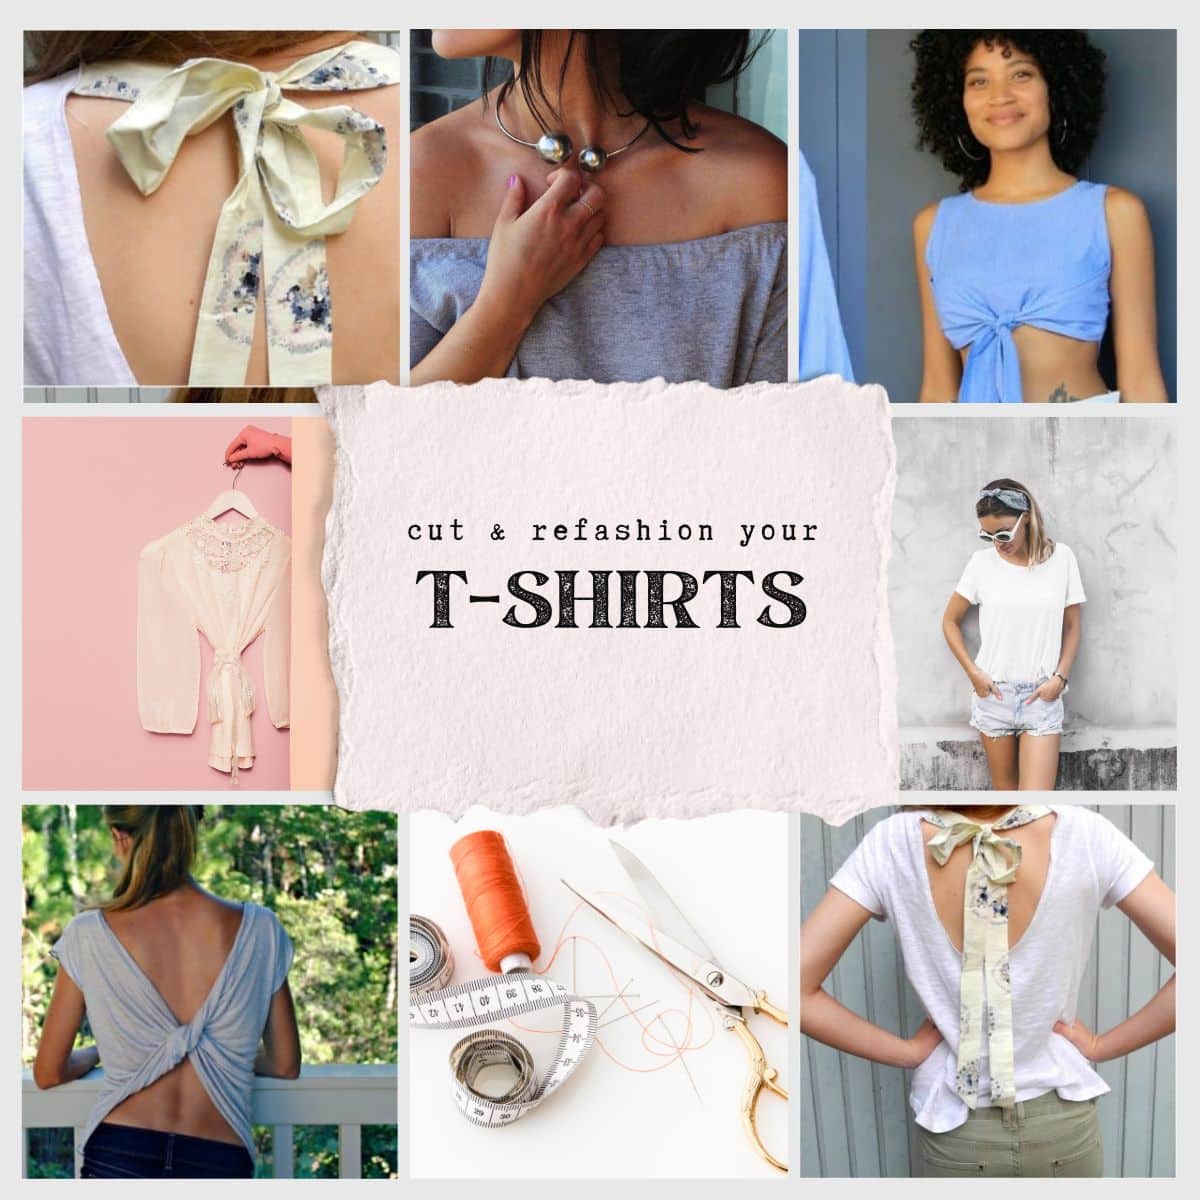 67 Fun Ways to Cut and Refashion Your T-Shirts - DIY & Crafts